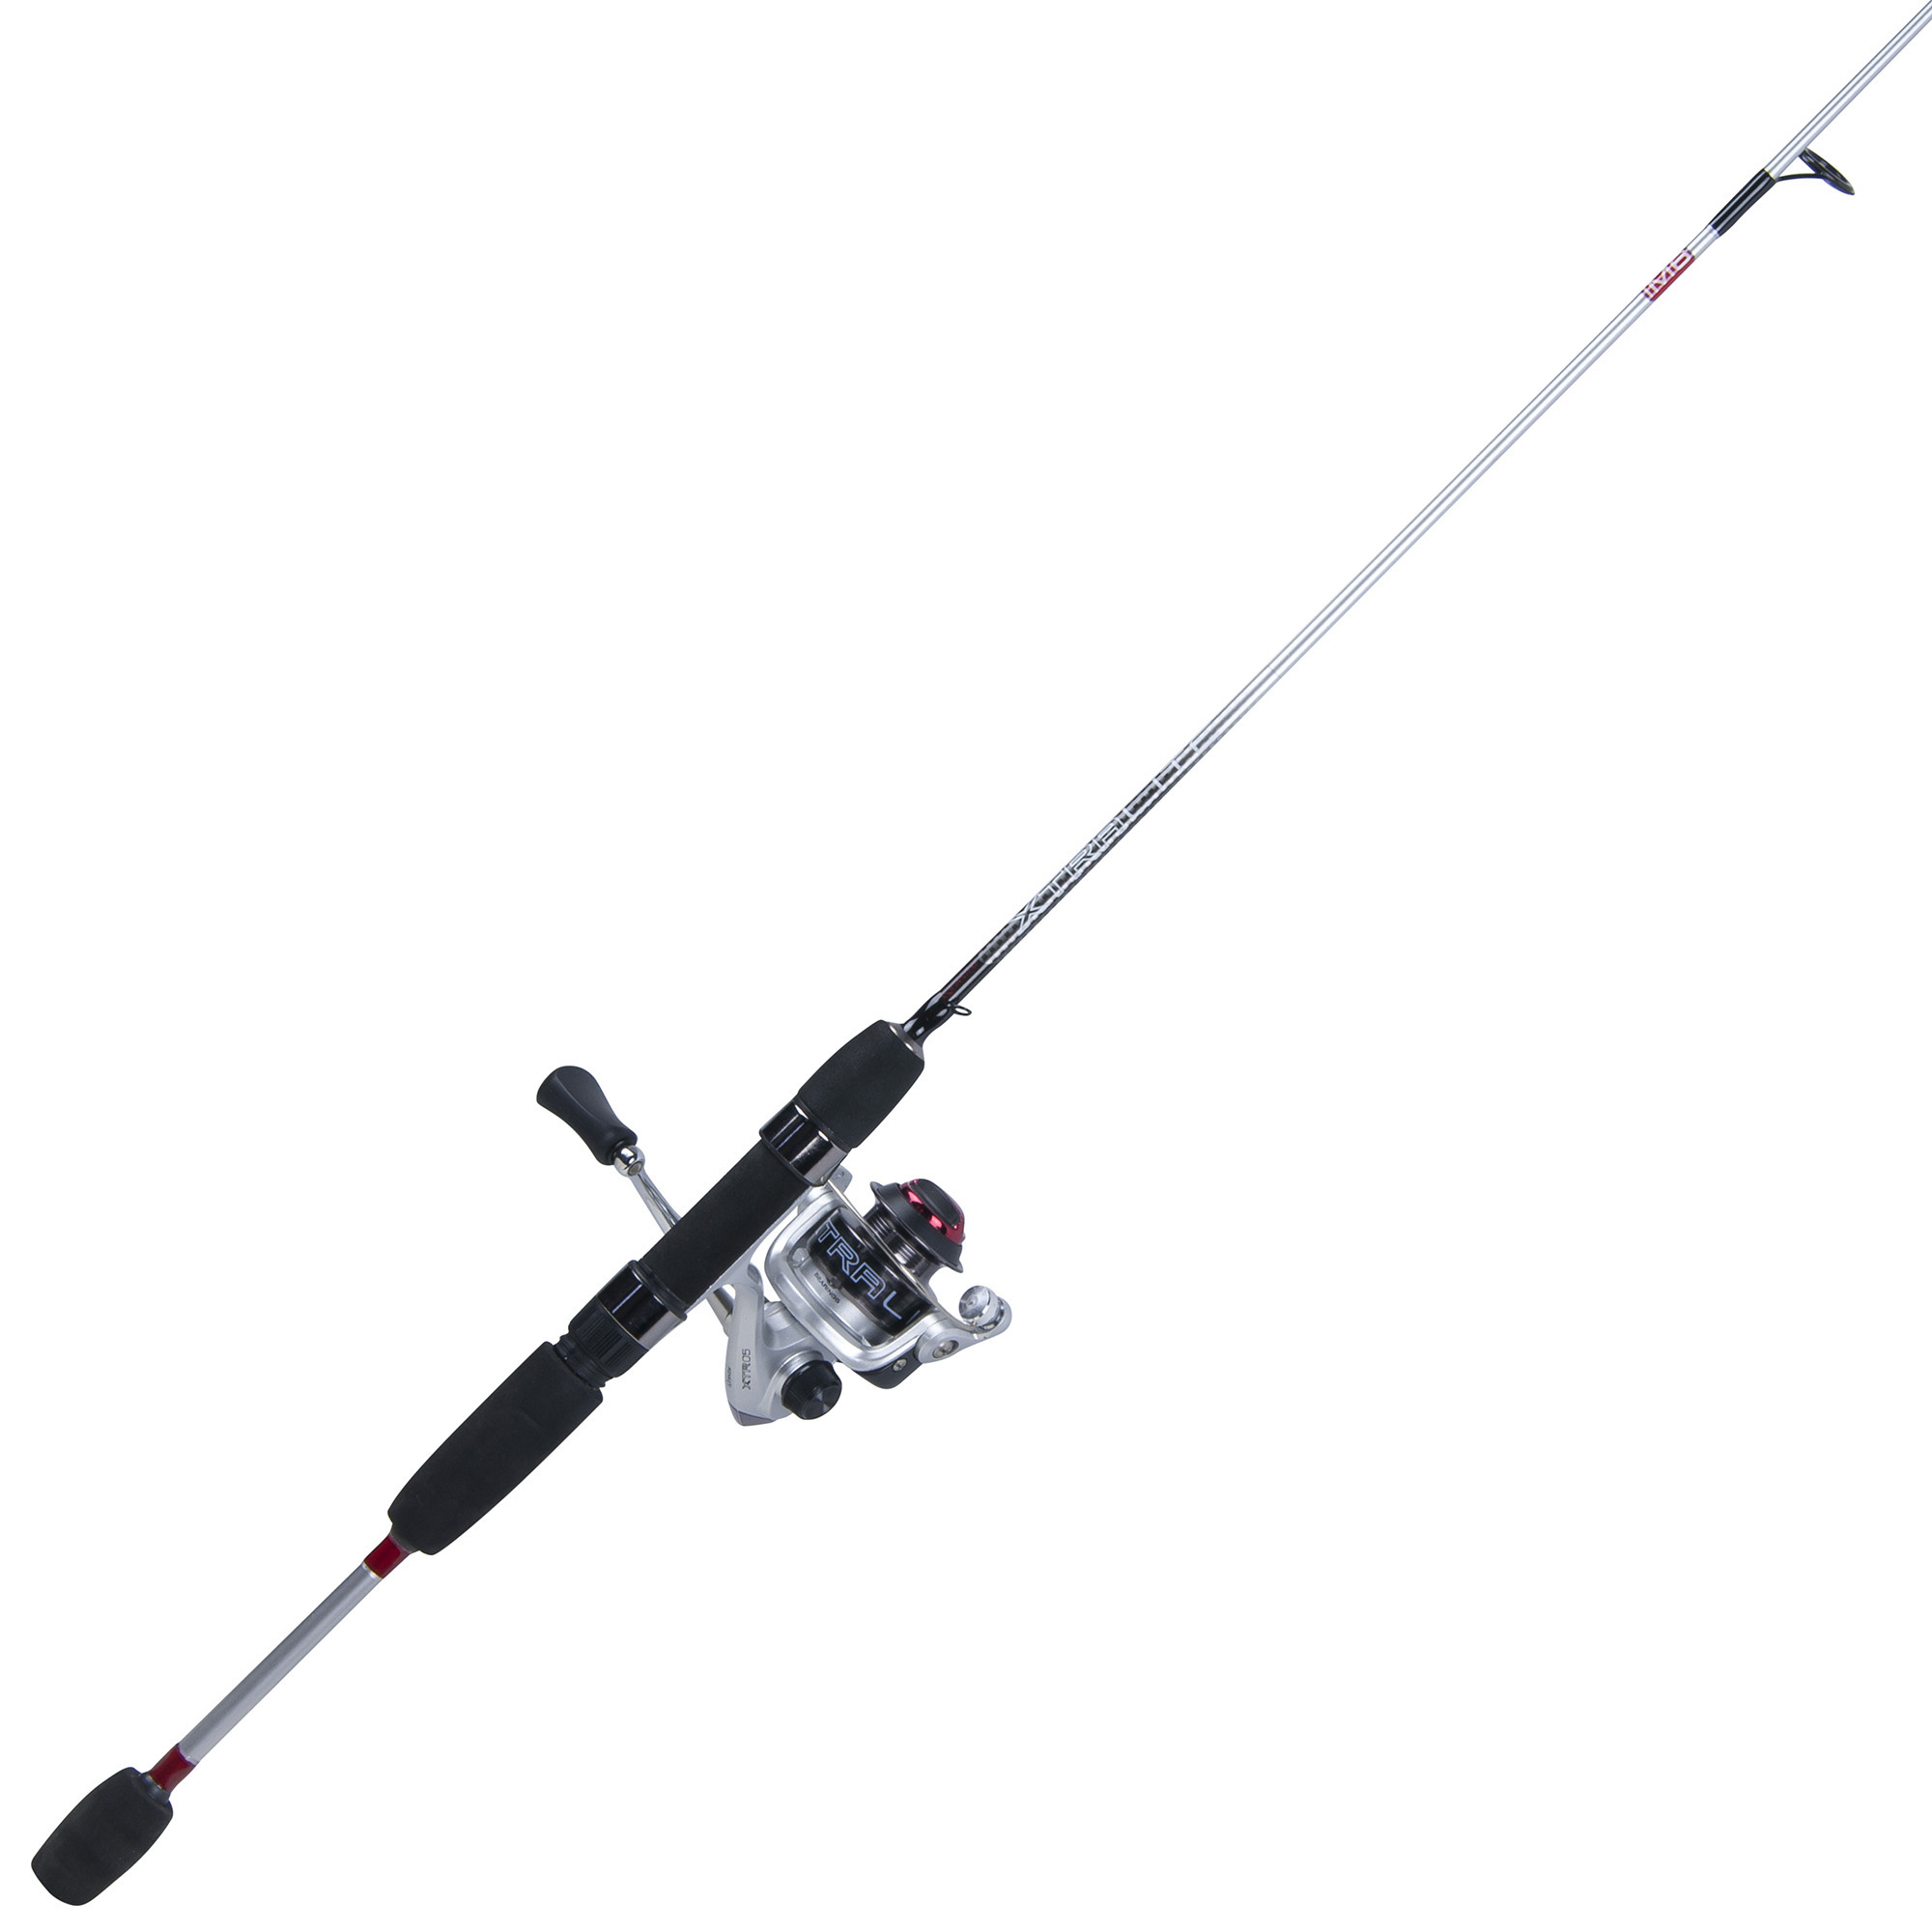  Quantum Drive Spinning Reel and Fishing Rod Combo, 6